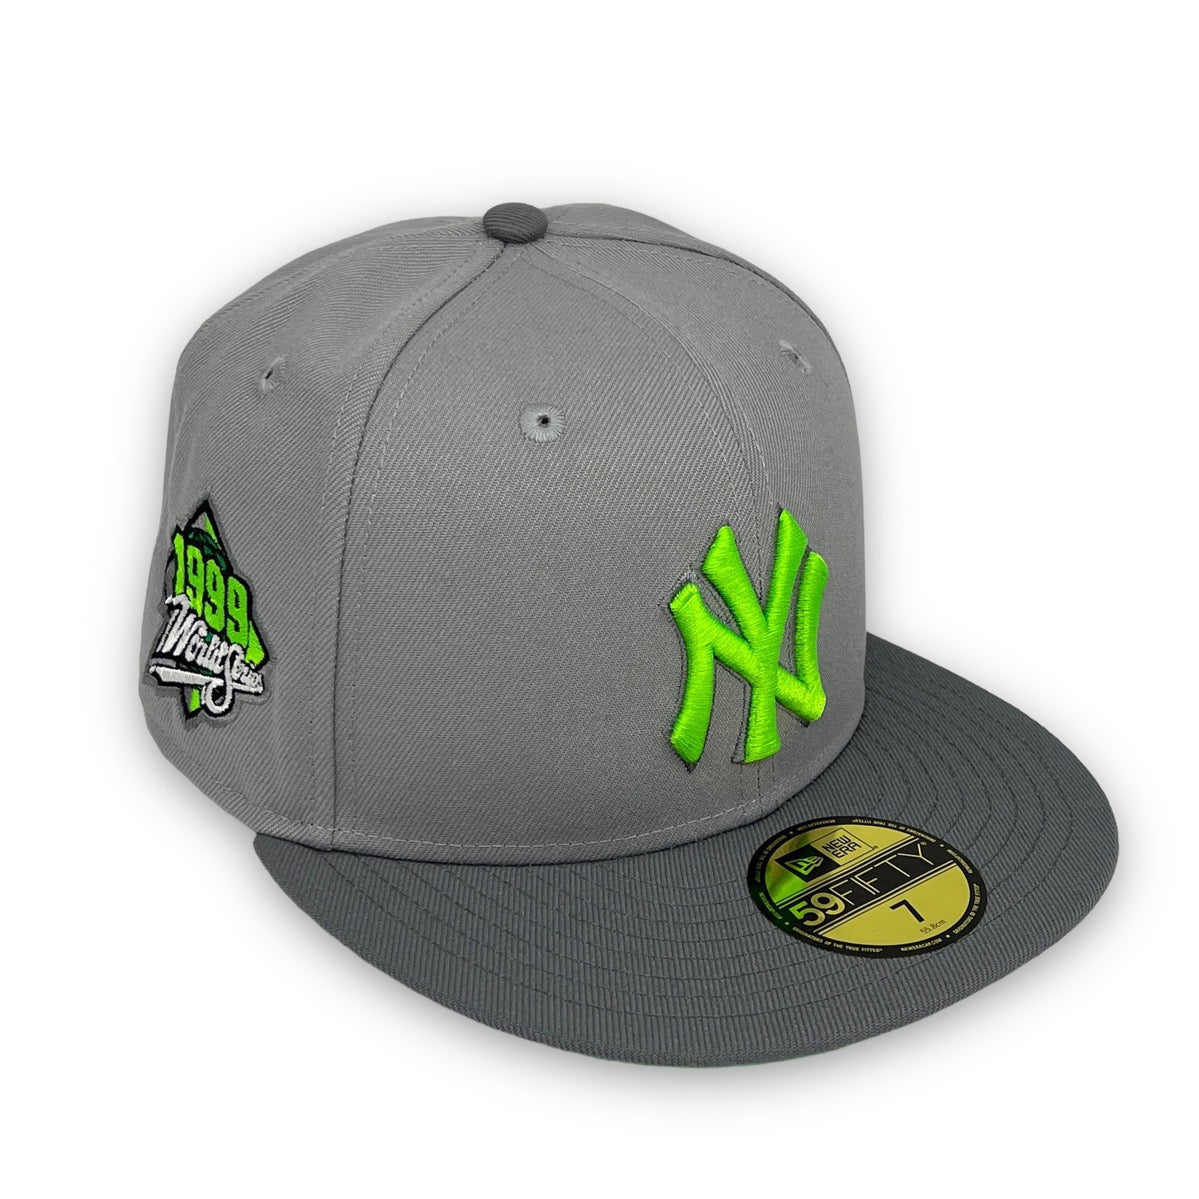 Yankees 99 WS New Era 59FIFTY Grey & Storm Grey Fitted Hat Neon Bottom –  USA CAP KING